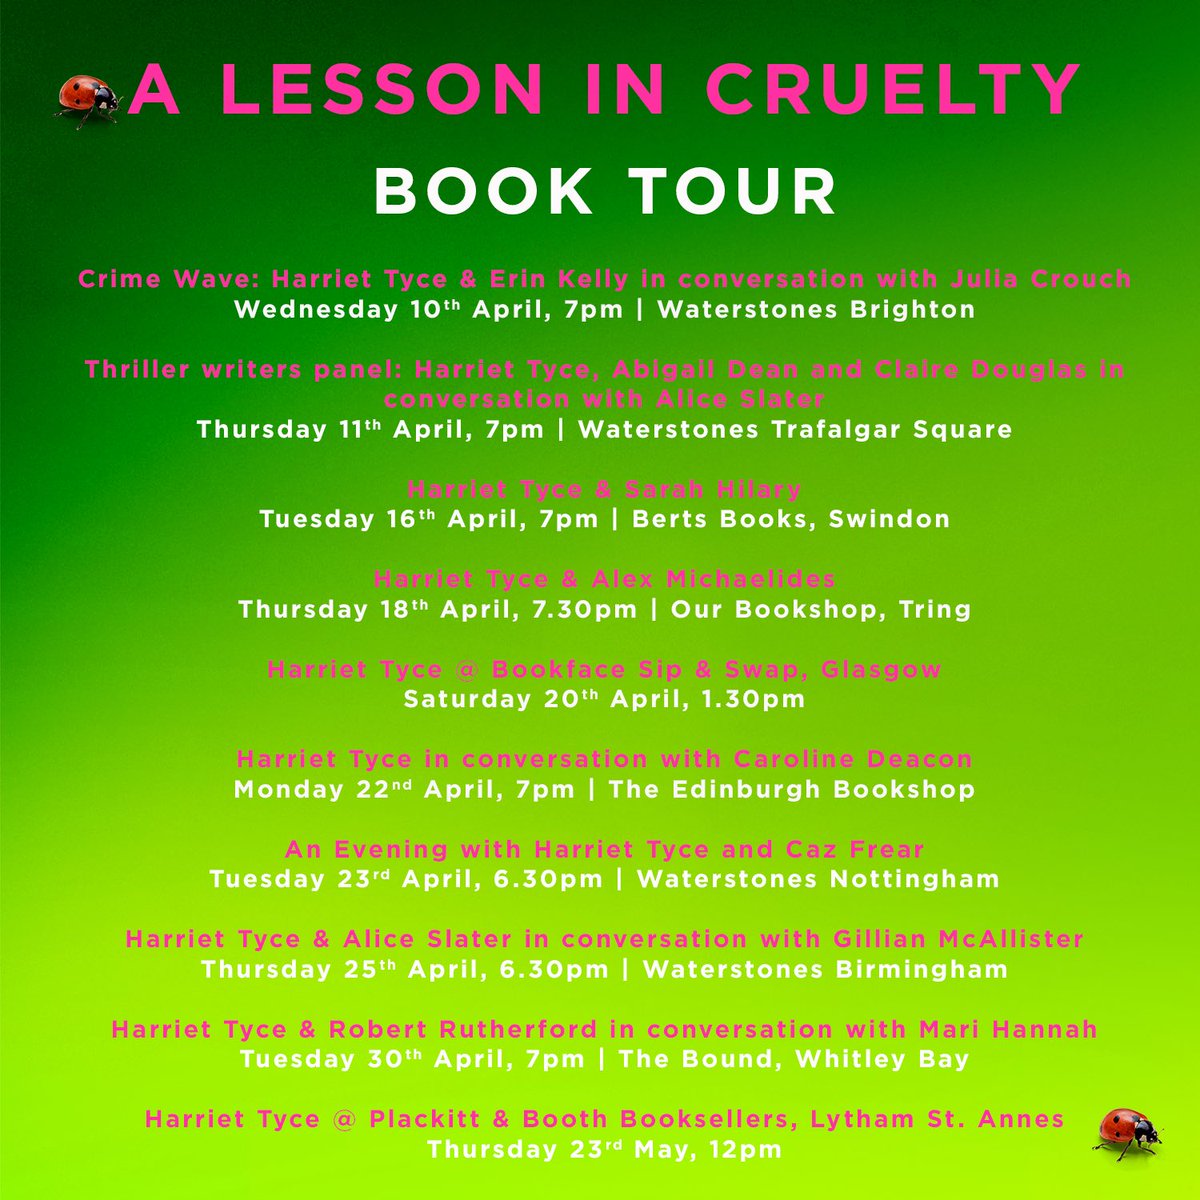 @harriet_tyce has done it again - #ALessonInCruelty is another fabulous read, clever, twisty and thought-provoking read proving why she is an auto-buy author for me.

My review is on Instagram:
instagram.com/p/C5o4rXSI8xI/…

@RosieMargesson @headlinepg